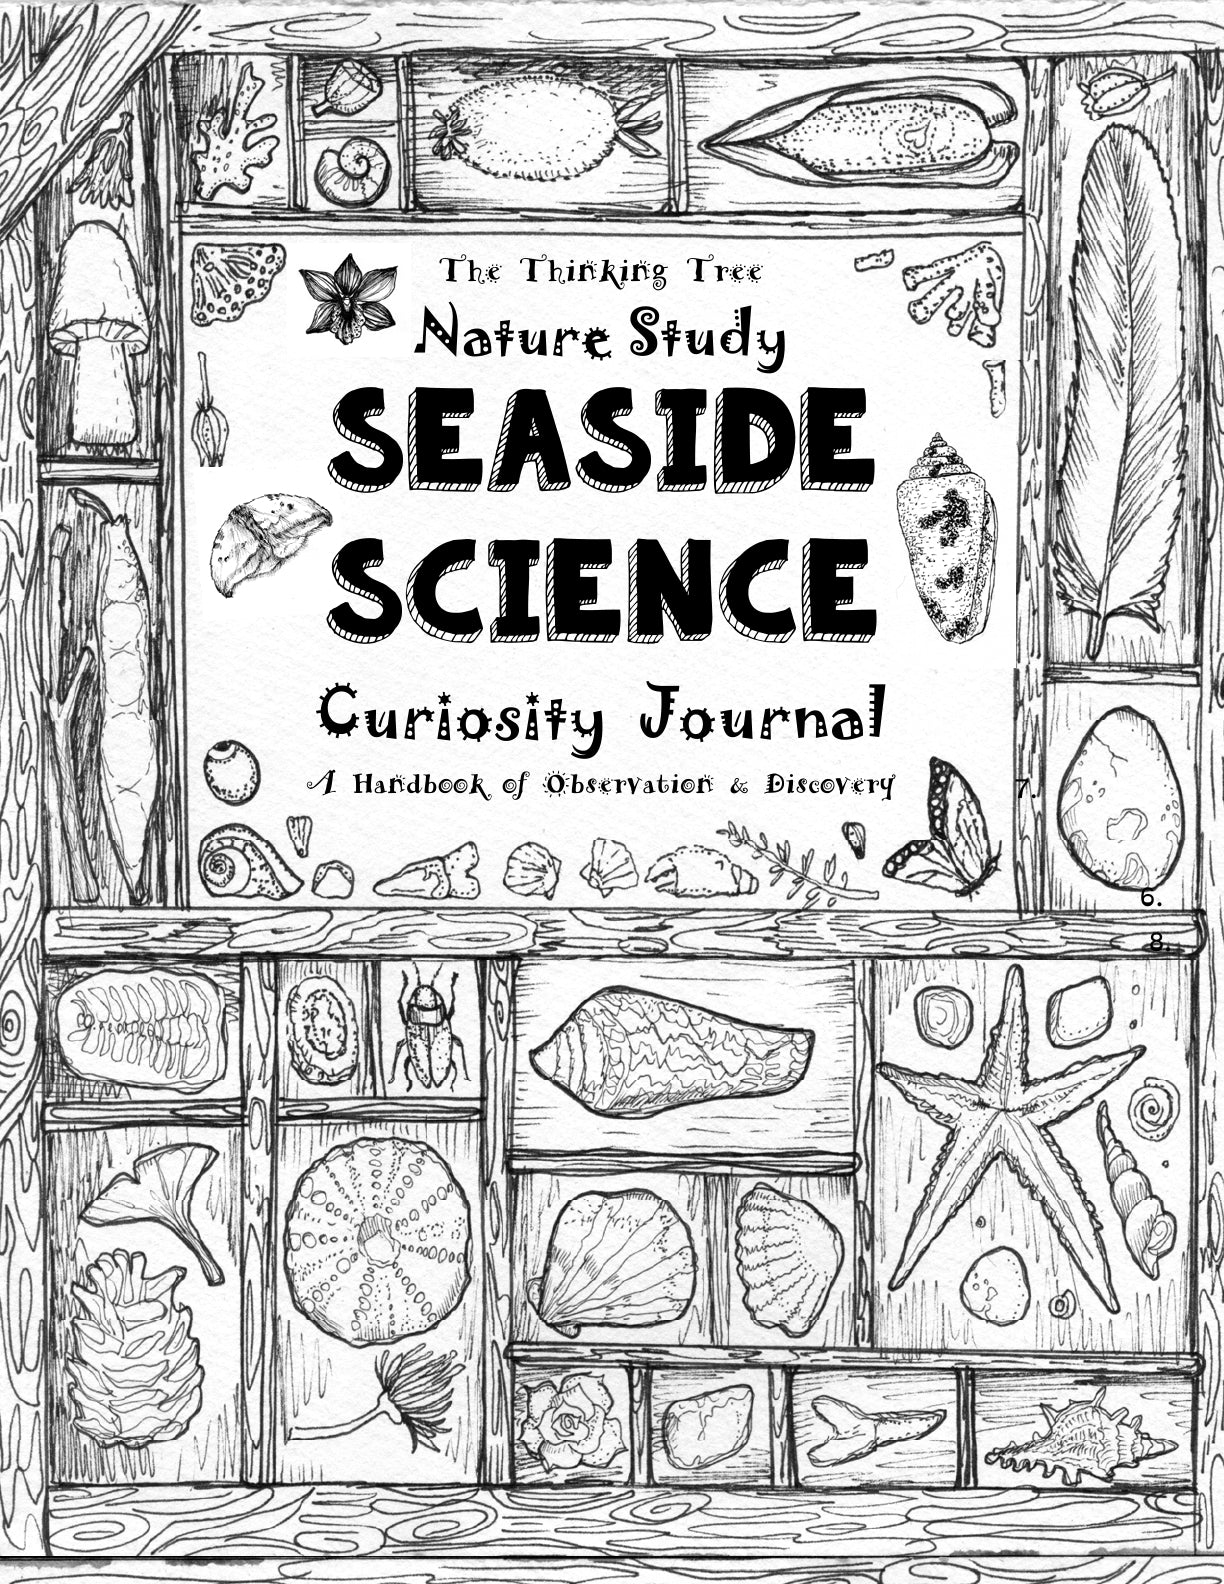 (Age 9+) Nature Study - Seaside Science